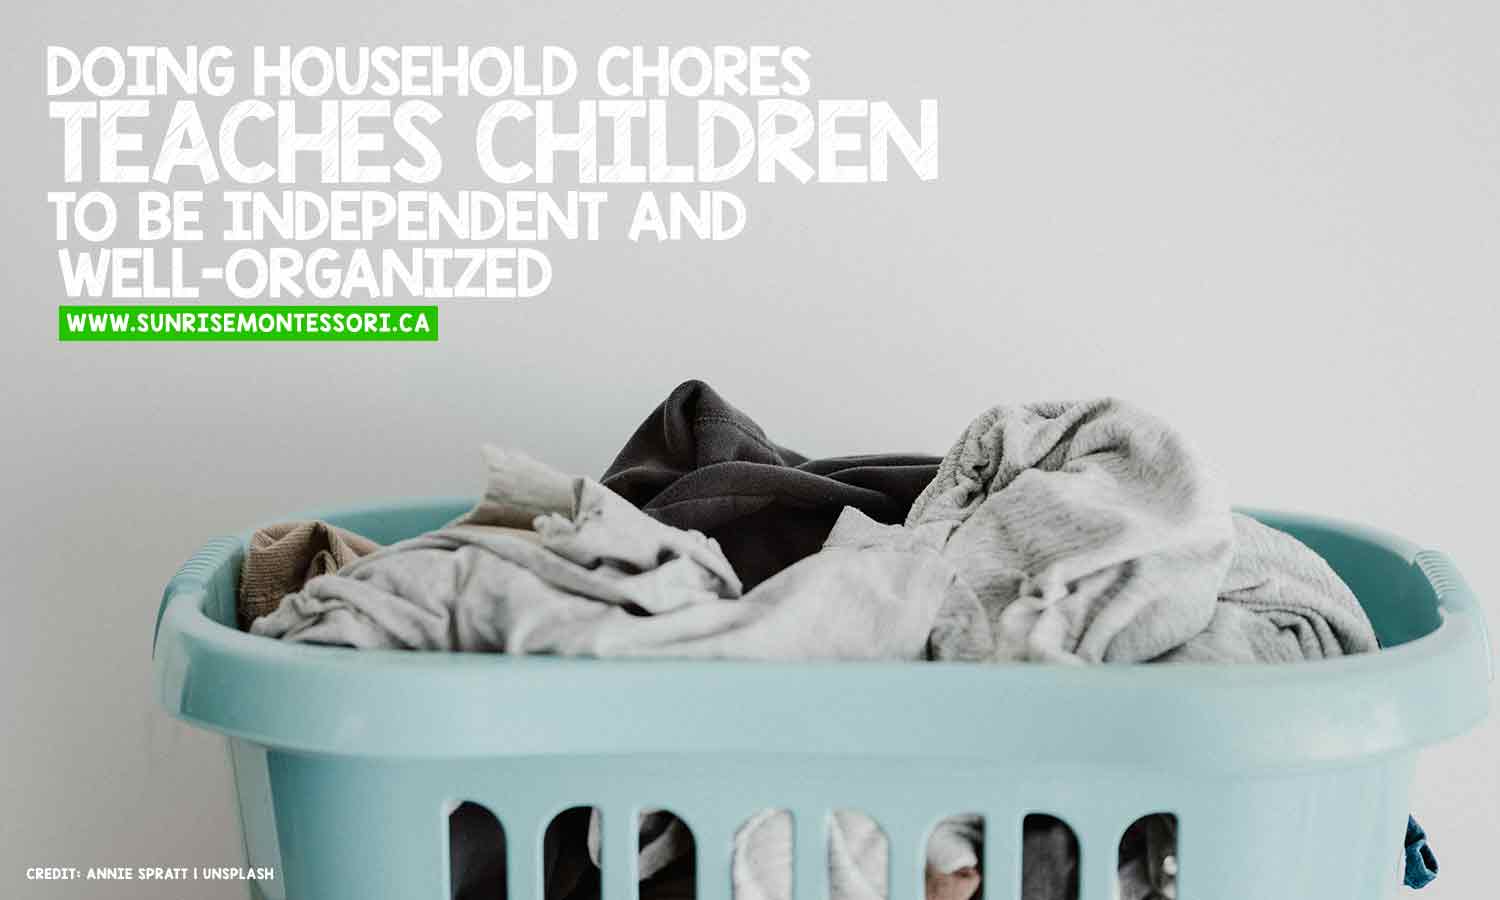 Doing household chores teaches children to be independent and well-organized